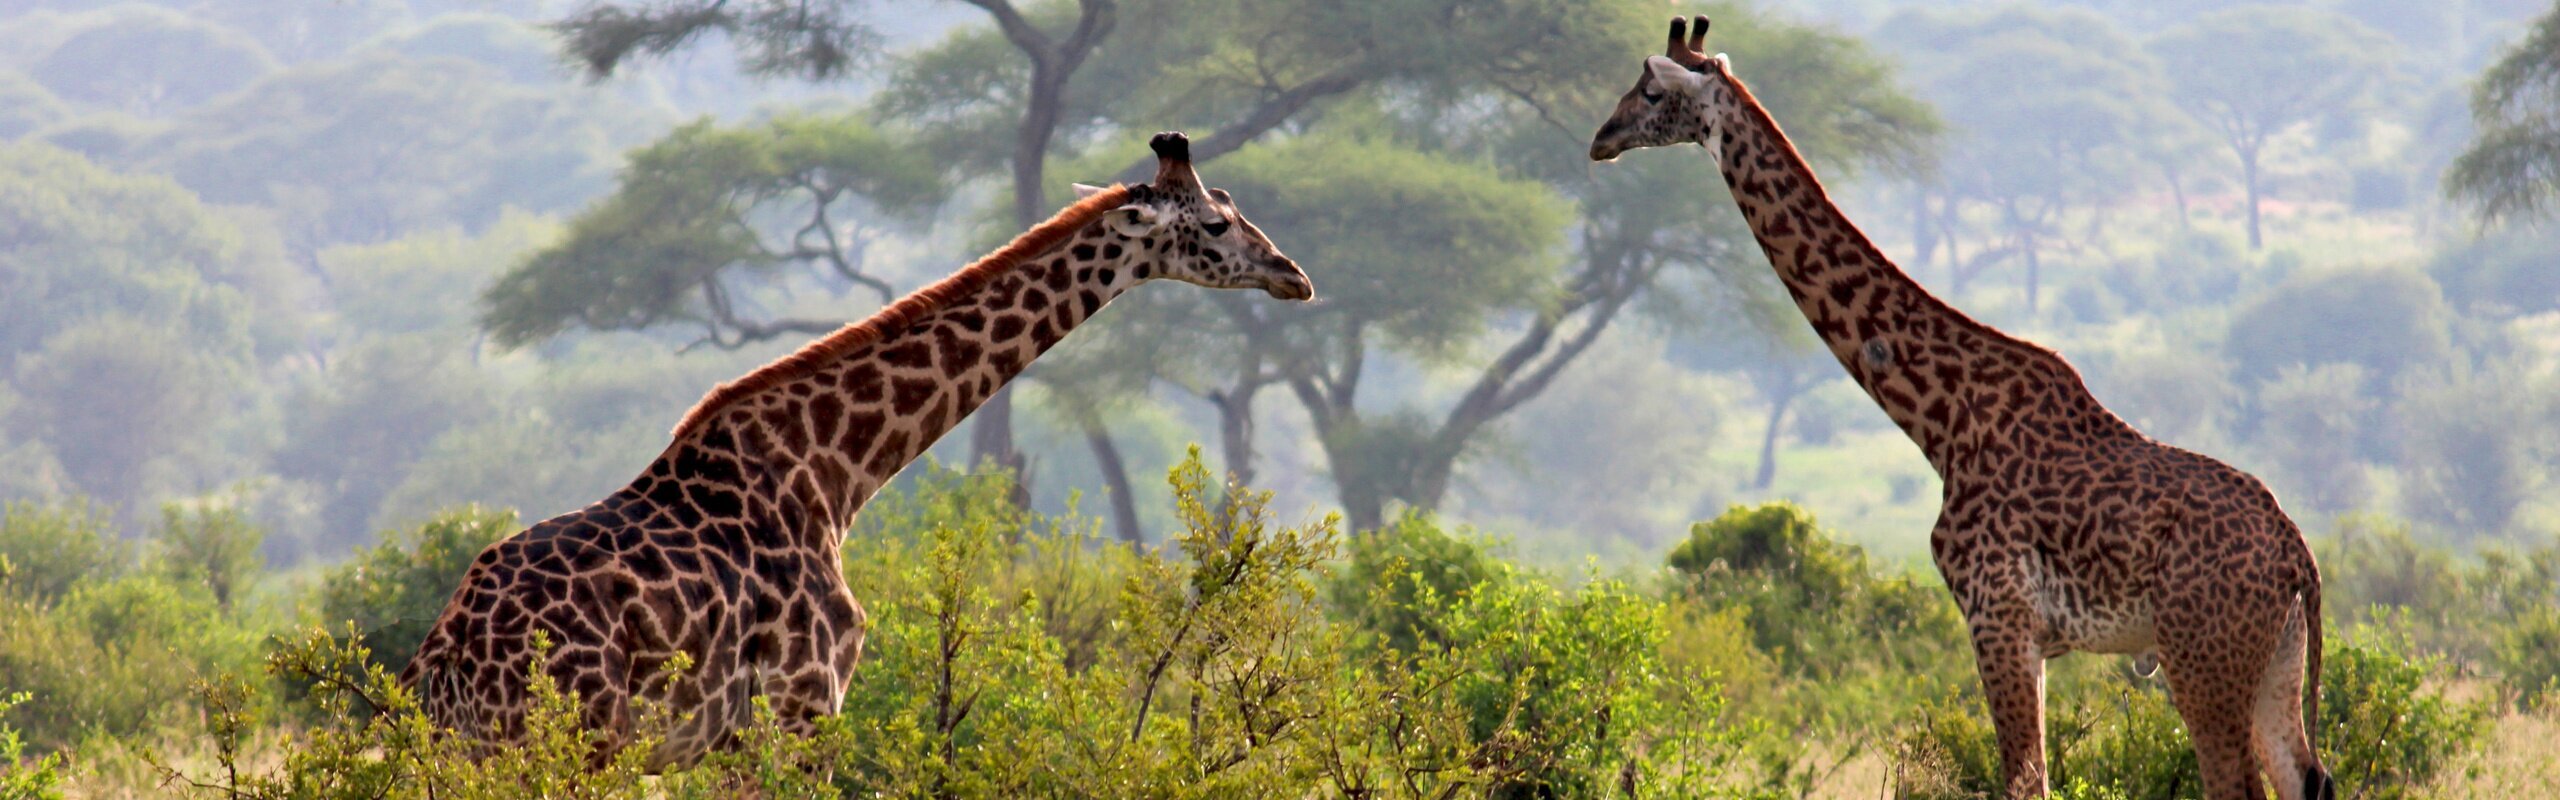 2 Weeks in Tanzania: 3 Top Itineraries for First-Timers